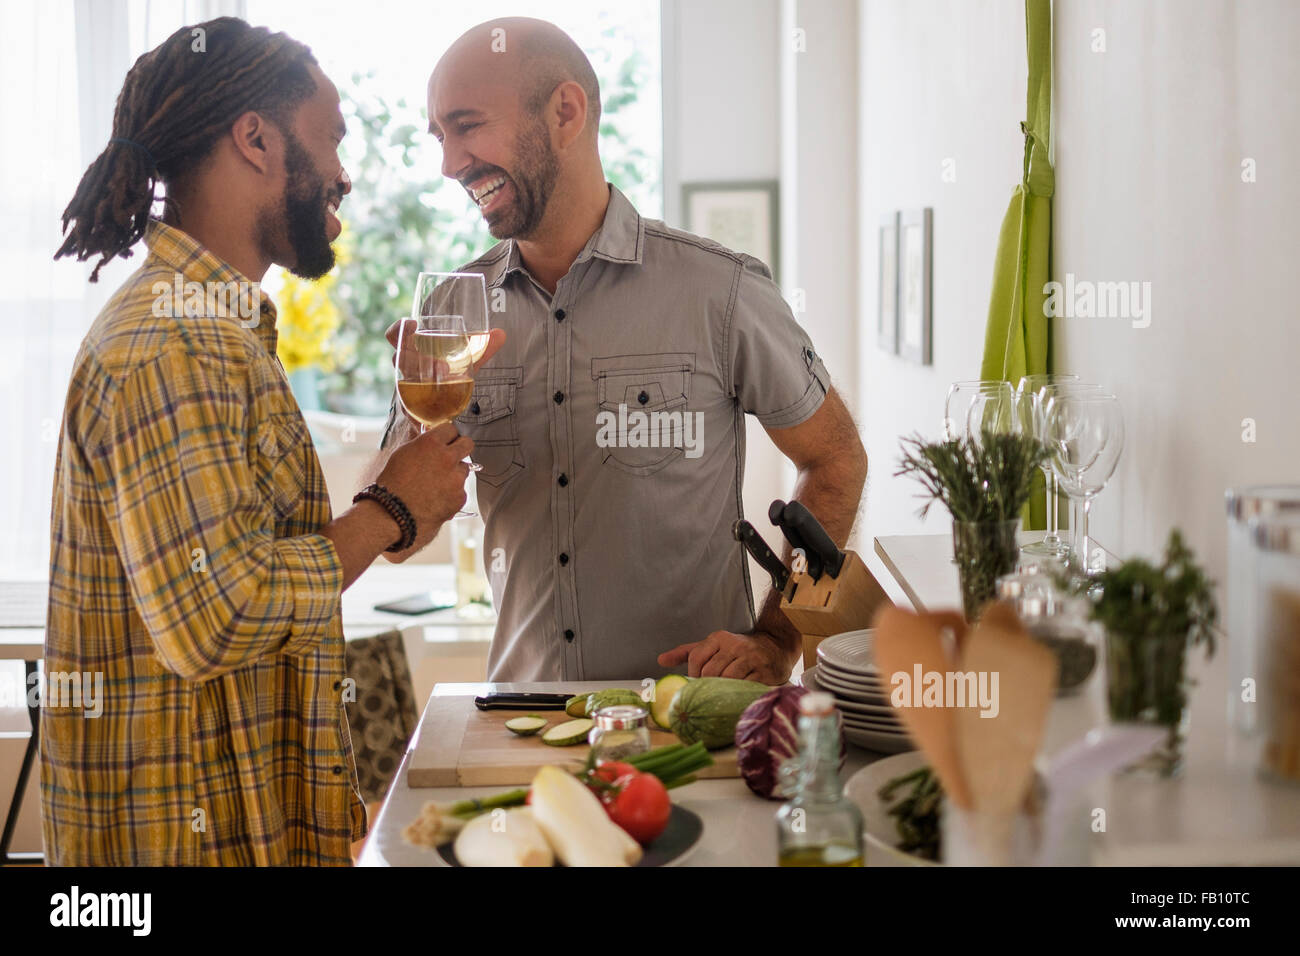 Smiley couple drinking wine in kitchen Banque D'Images